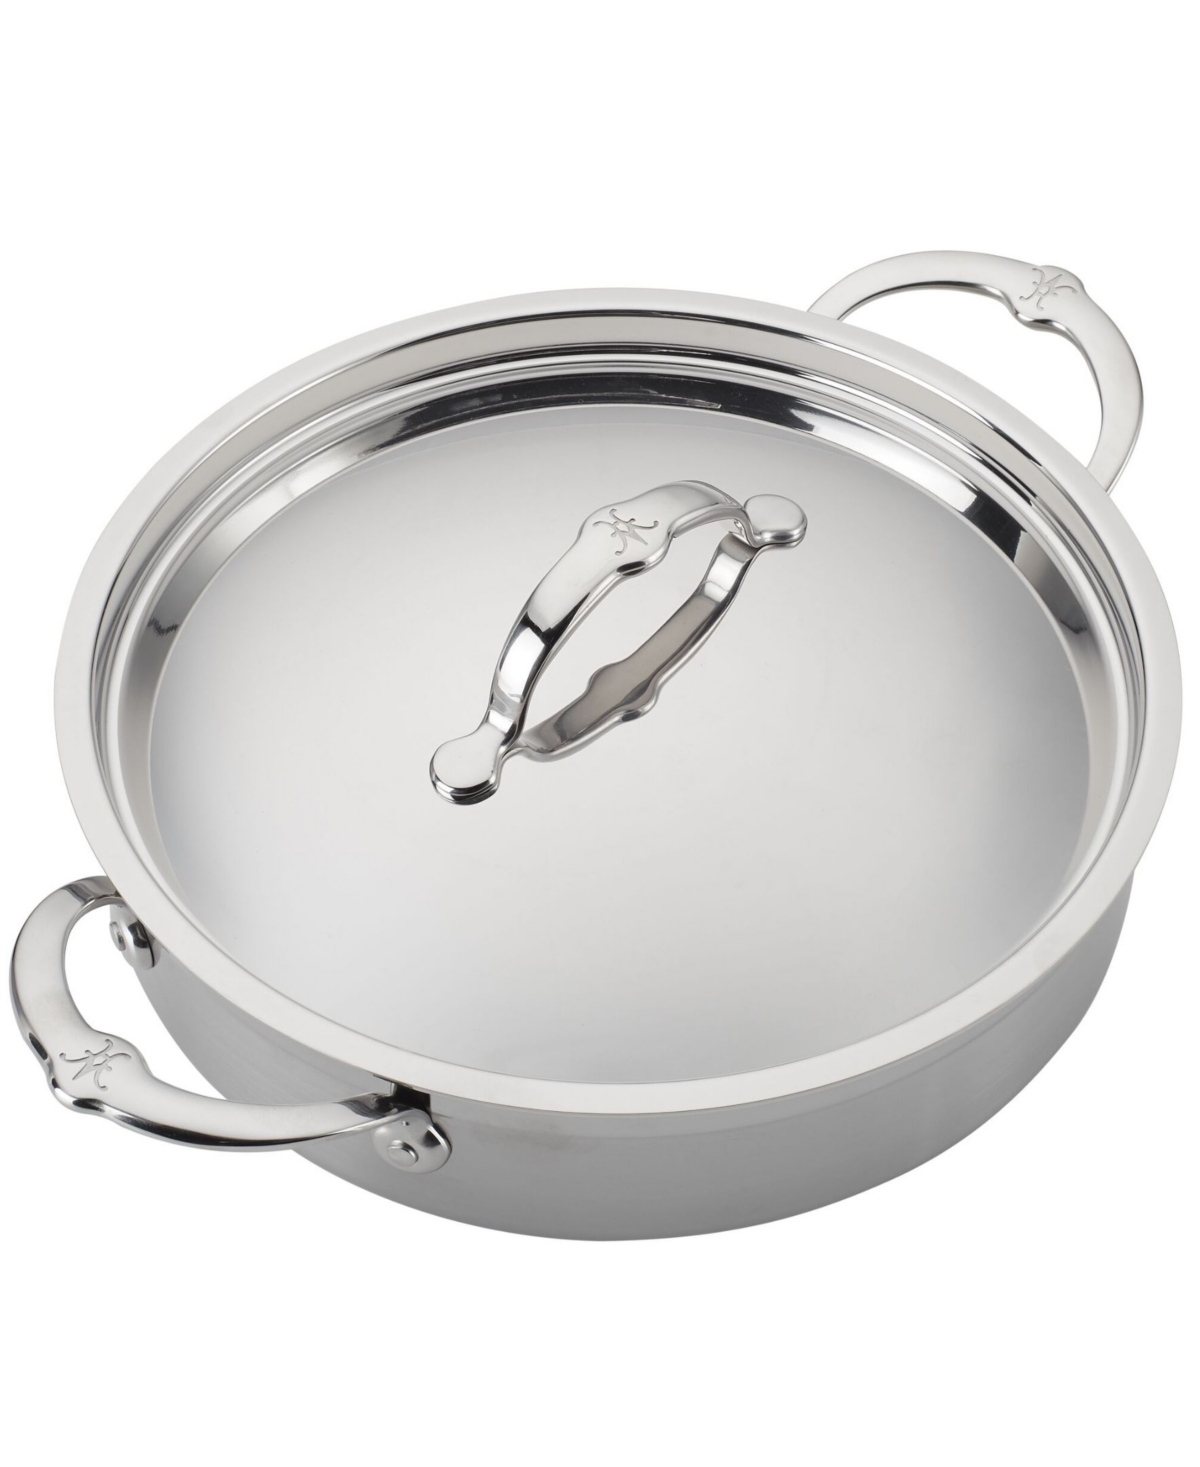 Shop Hestan Probond Clad Stainless Steel 3.5-quart Covered Sauteuse In Silver